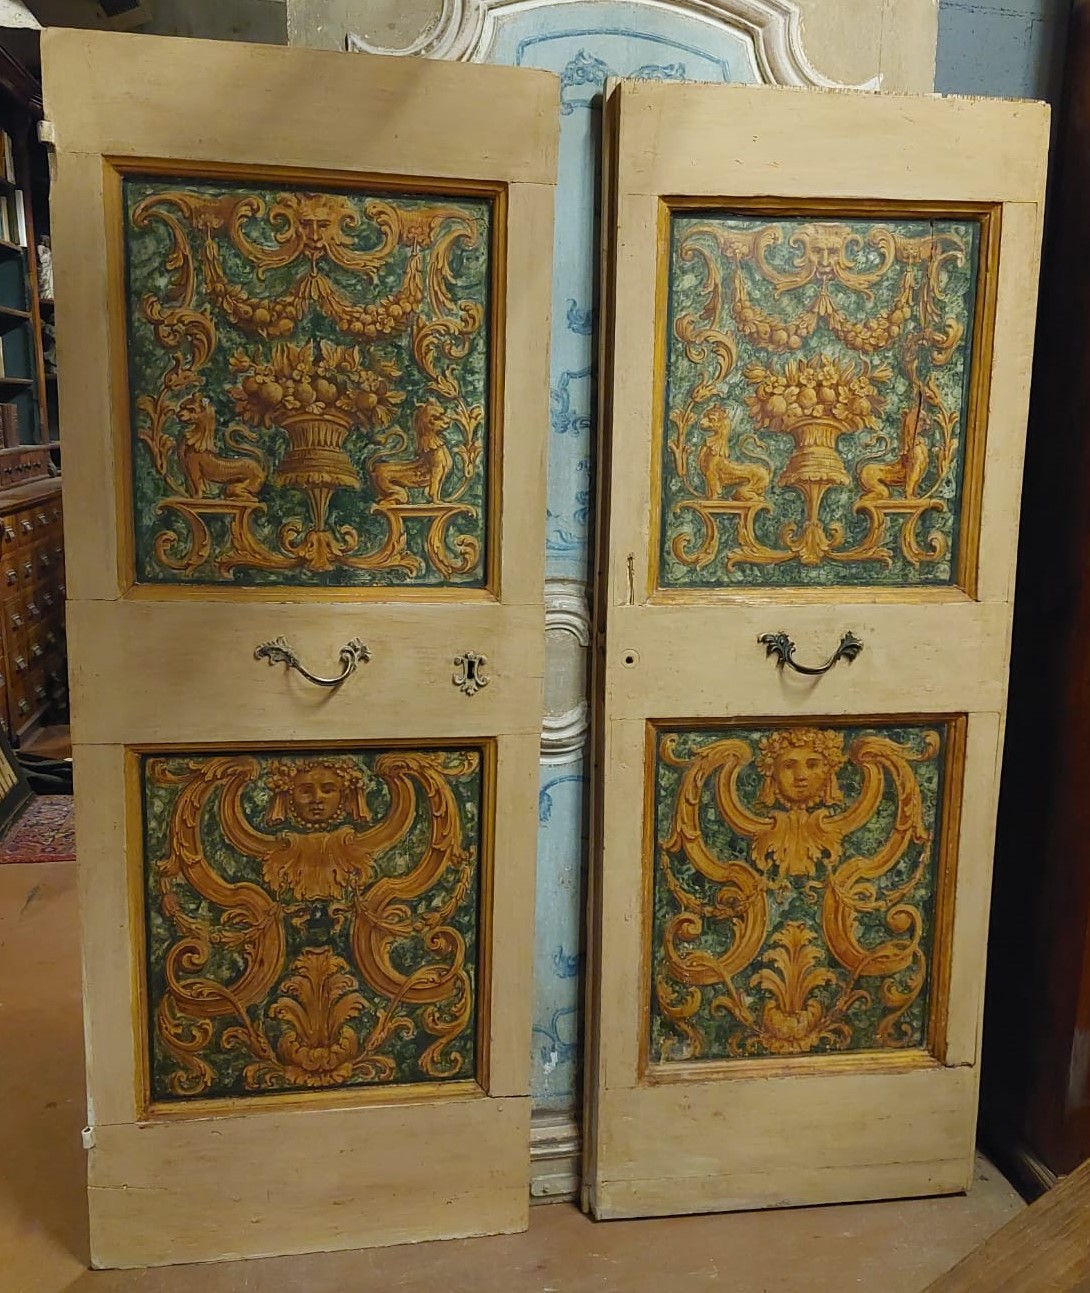 A pts783 - pair of lacquered doors, 18th century, cm W 68/69 x H 182/180